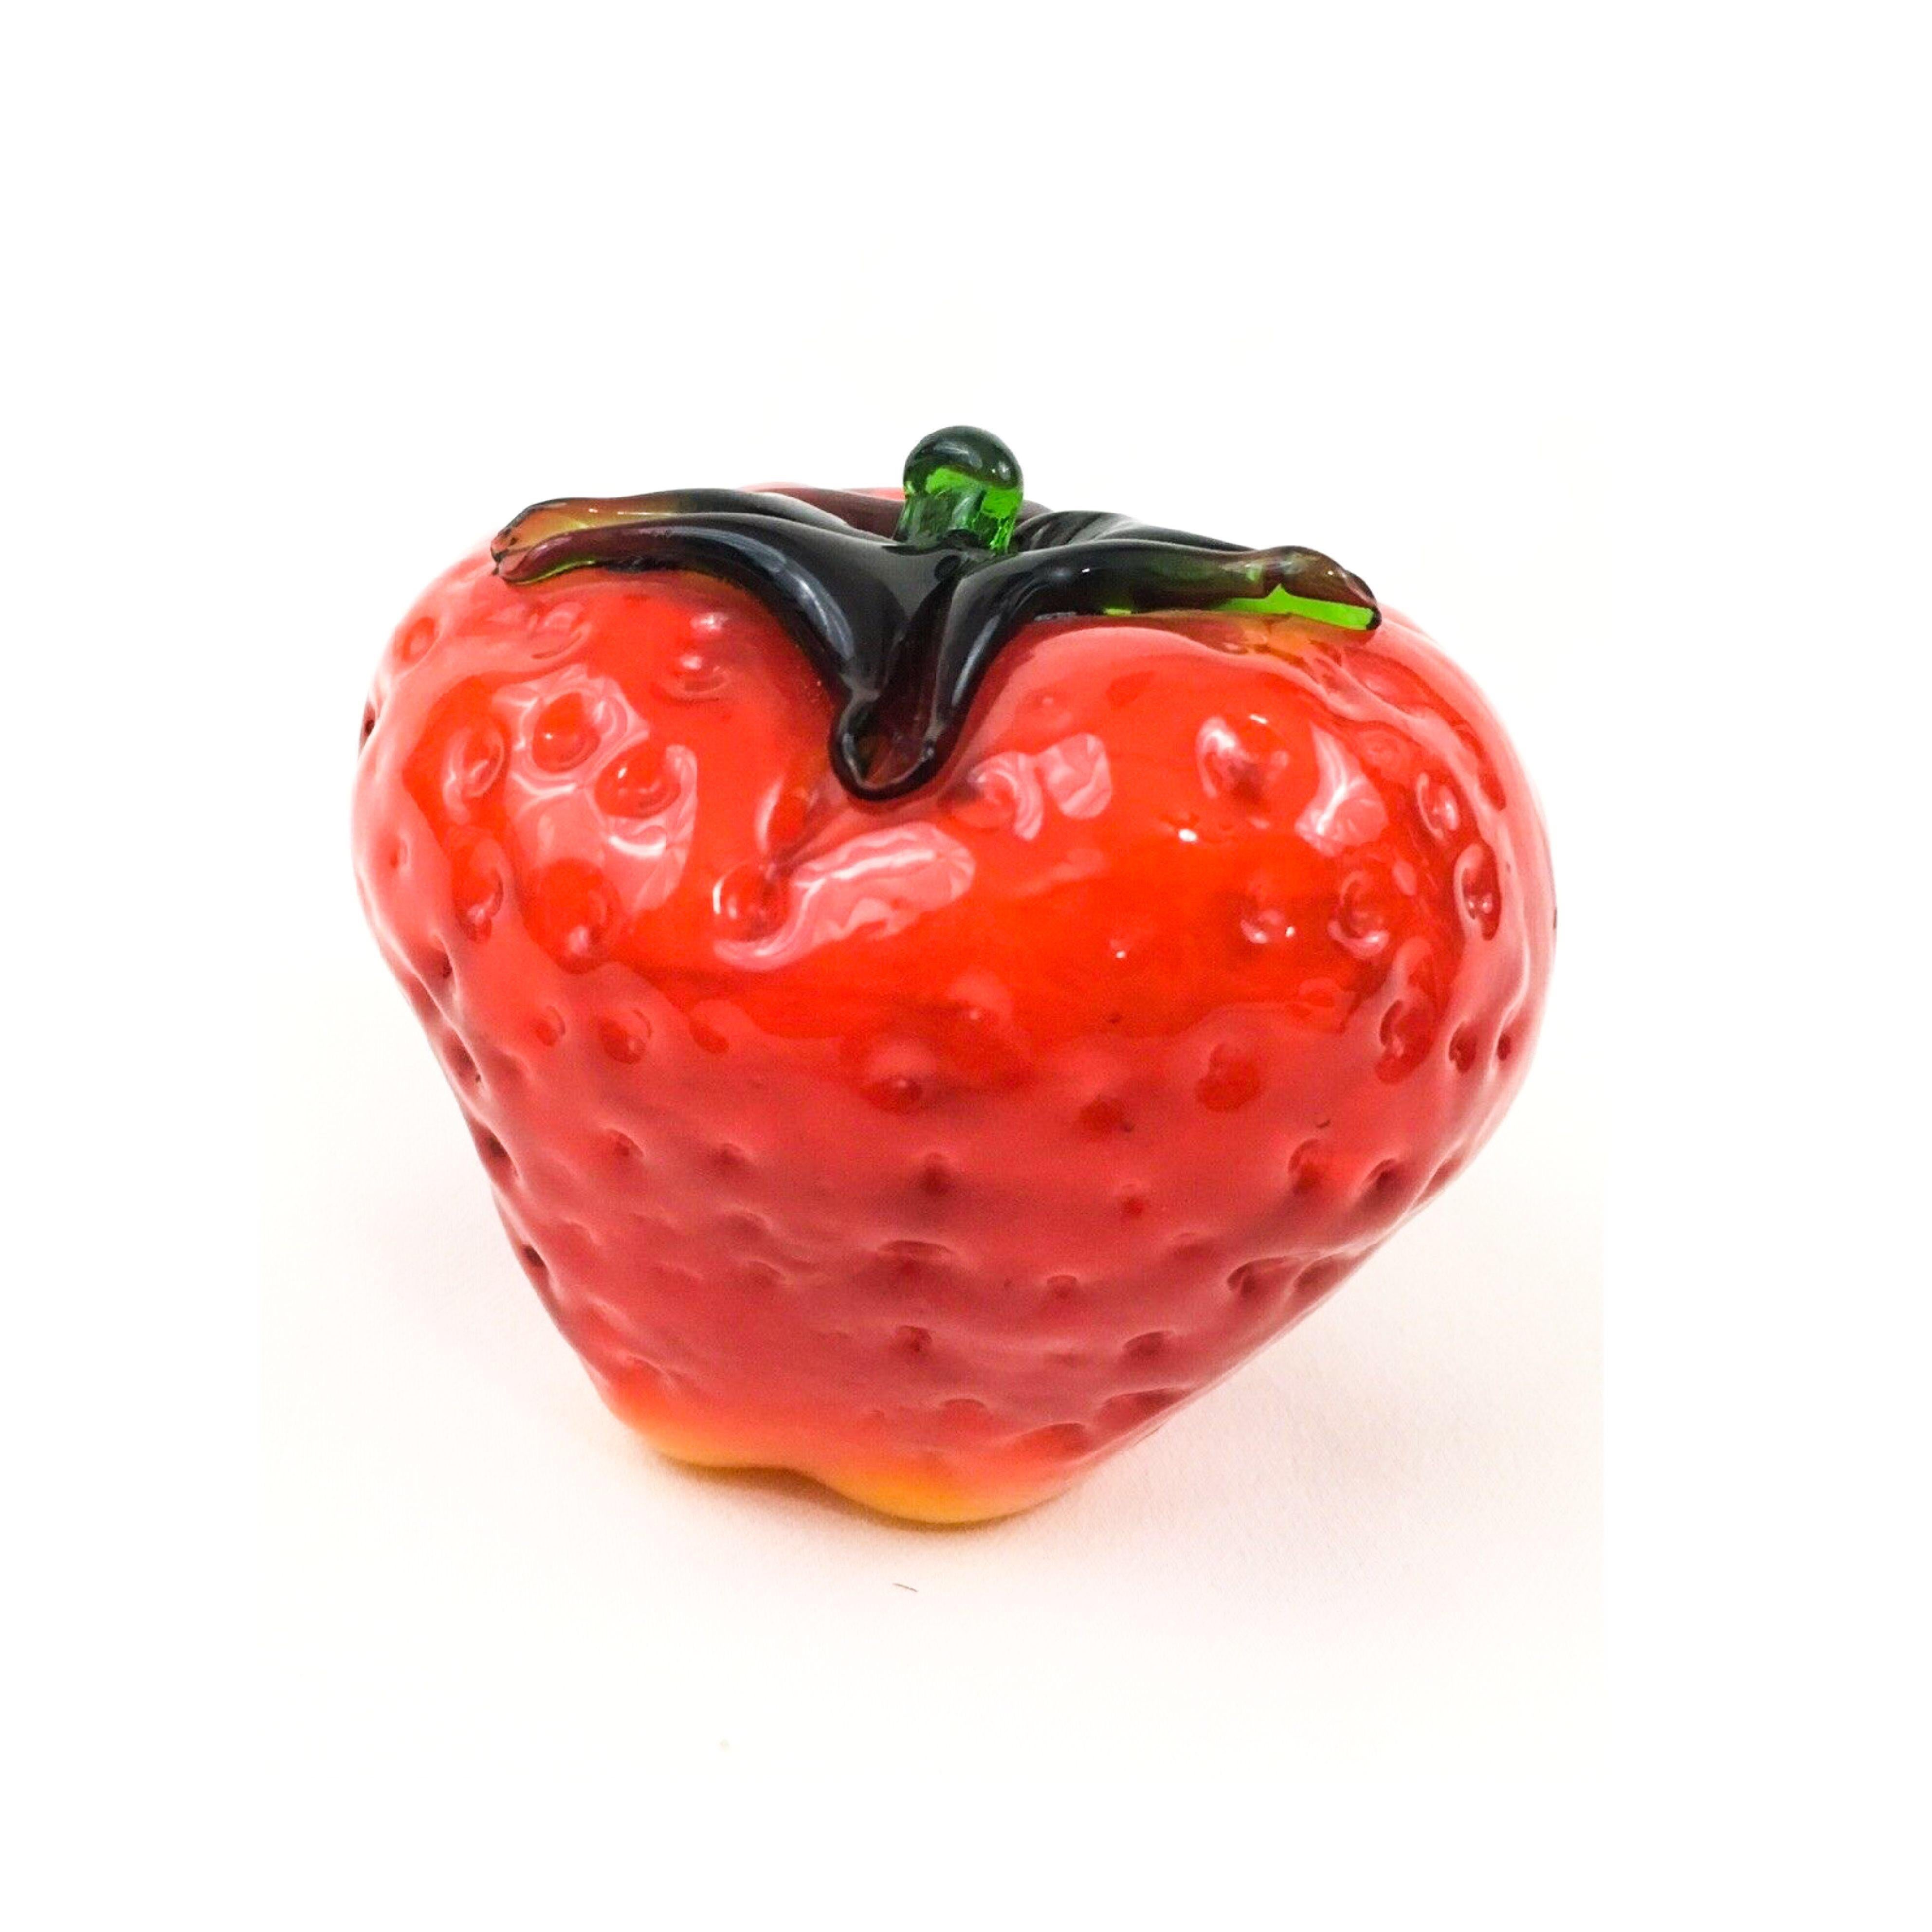 Vintage Murano art glass monumental red strawberry sculpture: blown-glass, pop art and truly adorable.